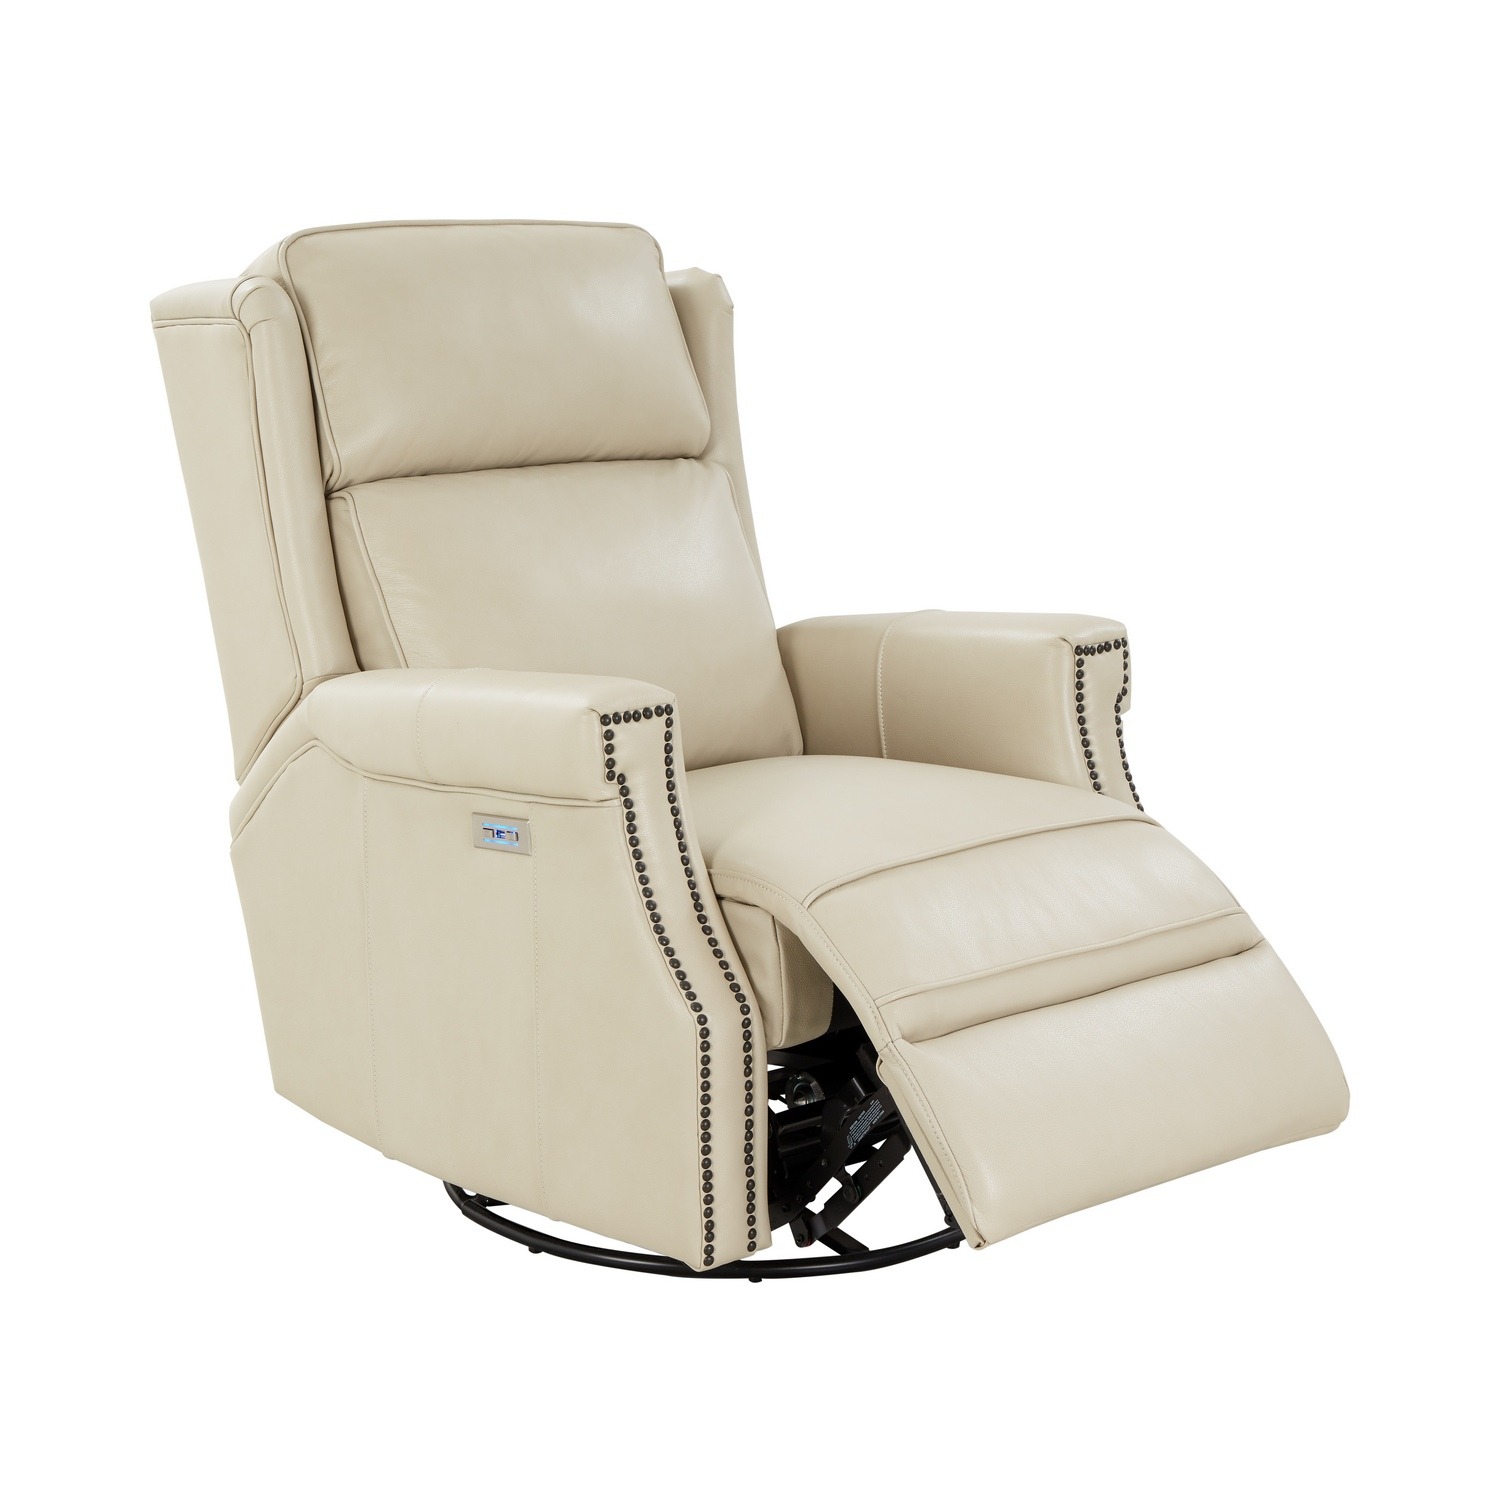 Barcalounger Brookmore Swivel Glider Recliner Chair with Power Recline and Power Head Rest - Barone Parchment/All Leather